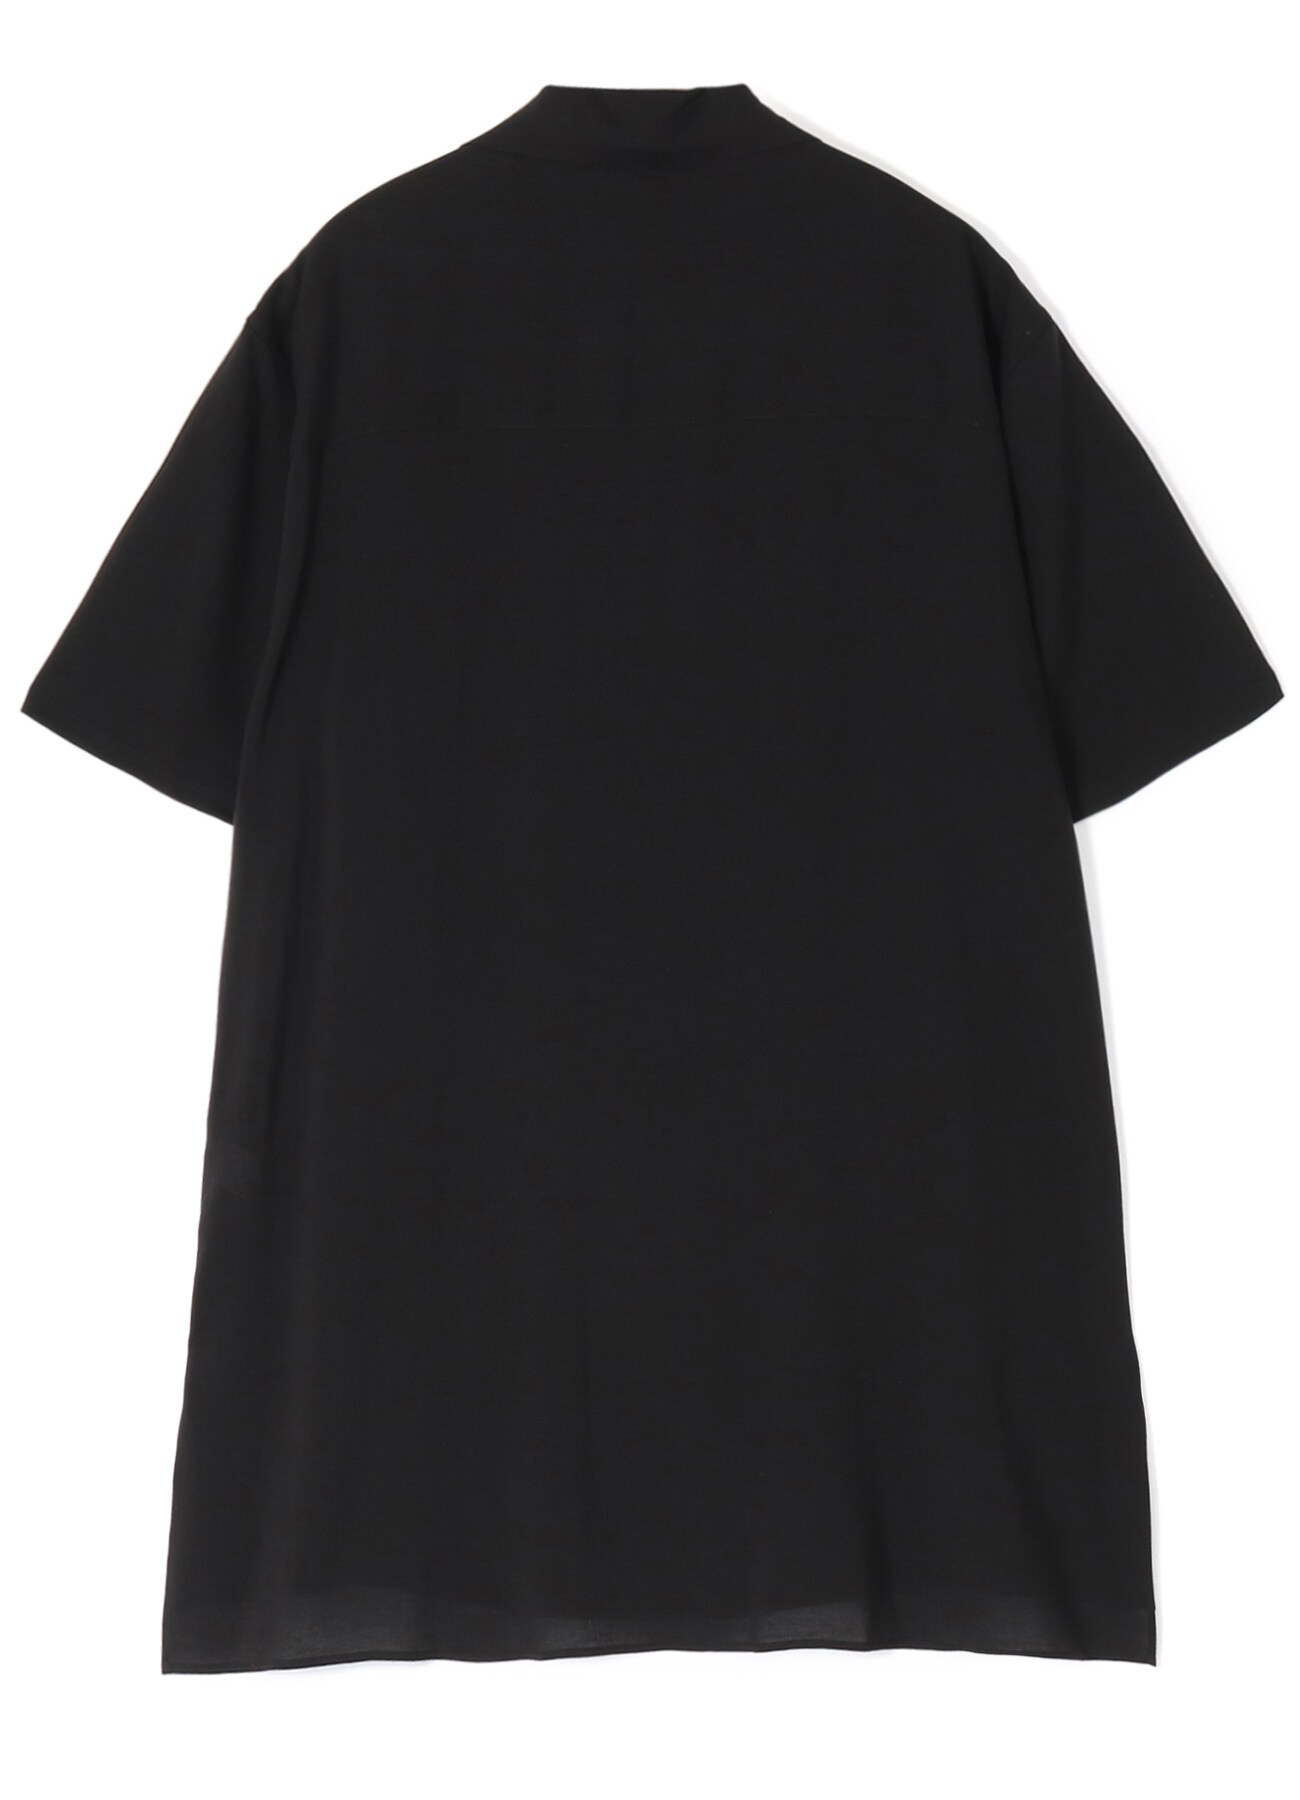 CELLULOSE LOAN OPEN COLLAR HALF SLEEVES BLOUSE